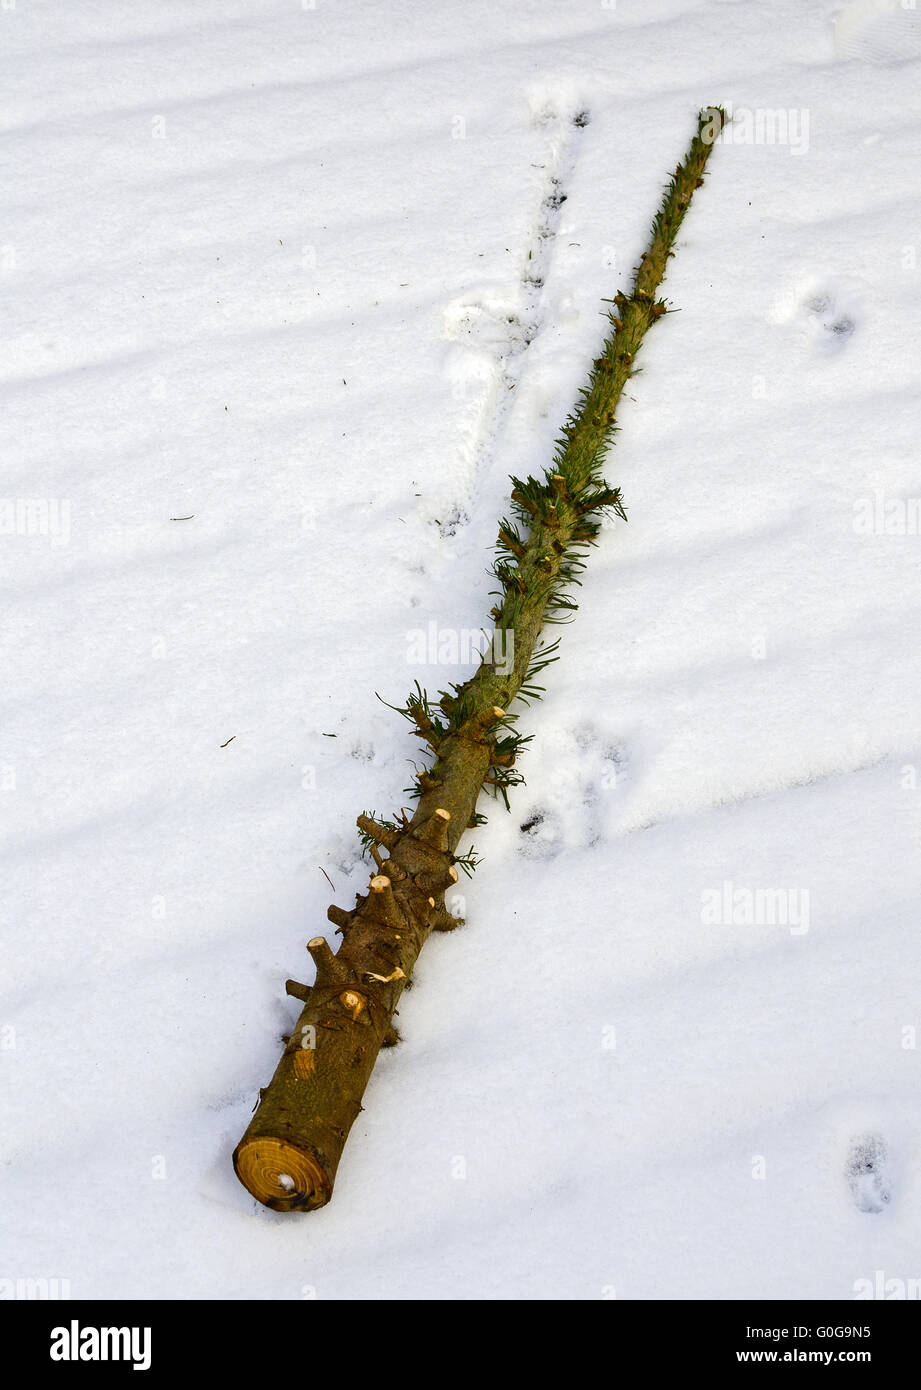 spruce bole without branches Stock Photo